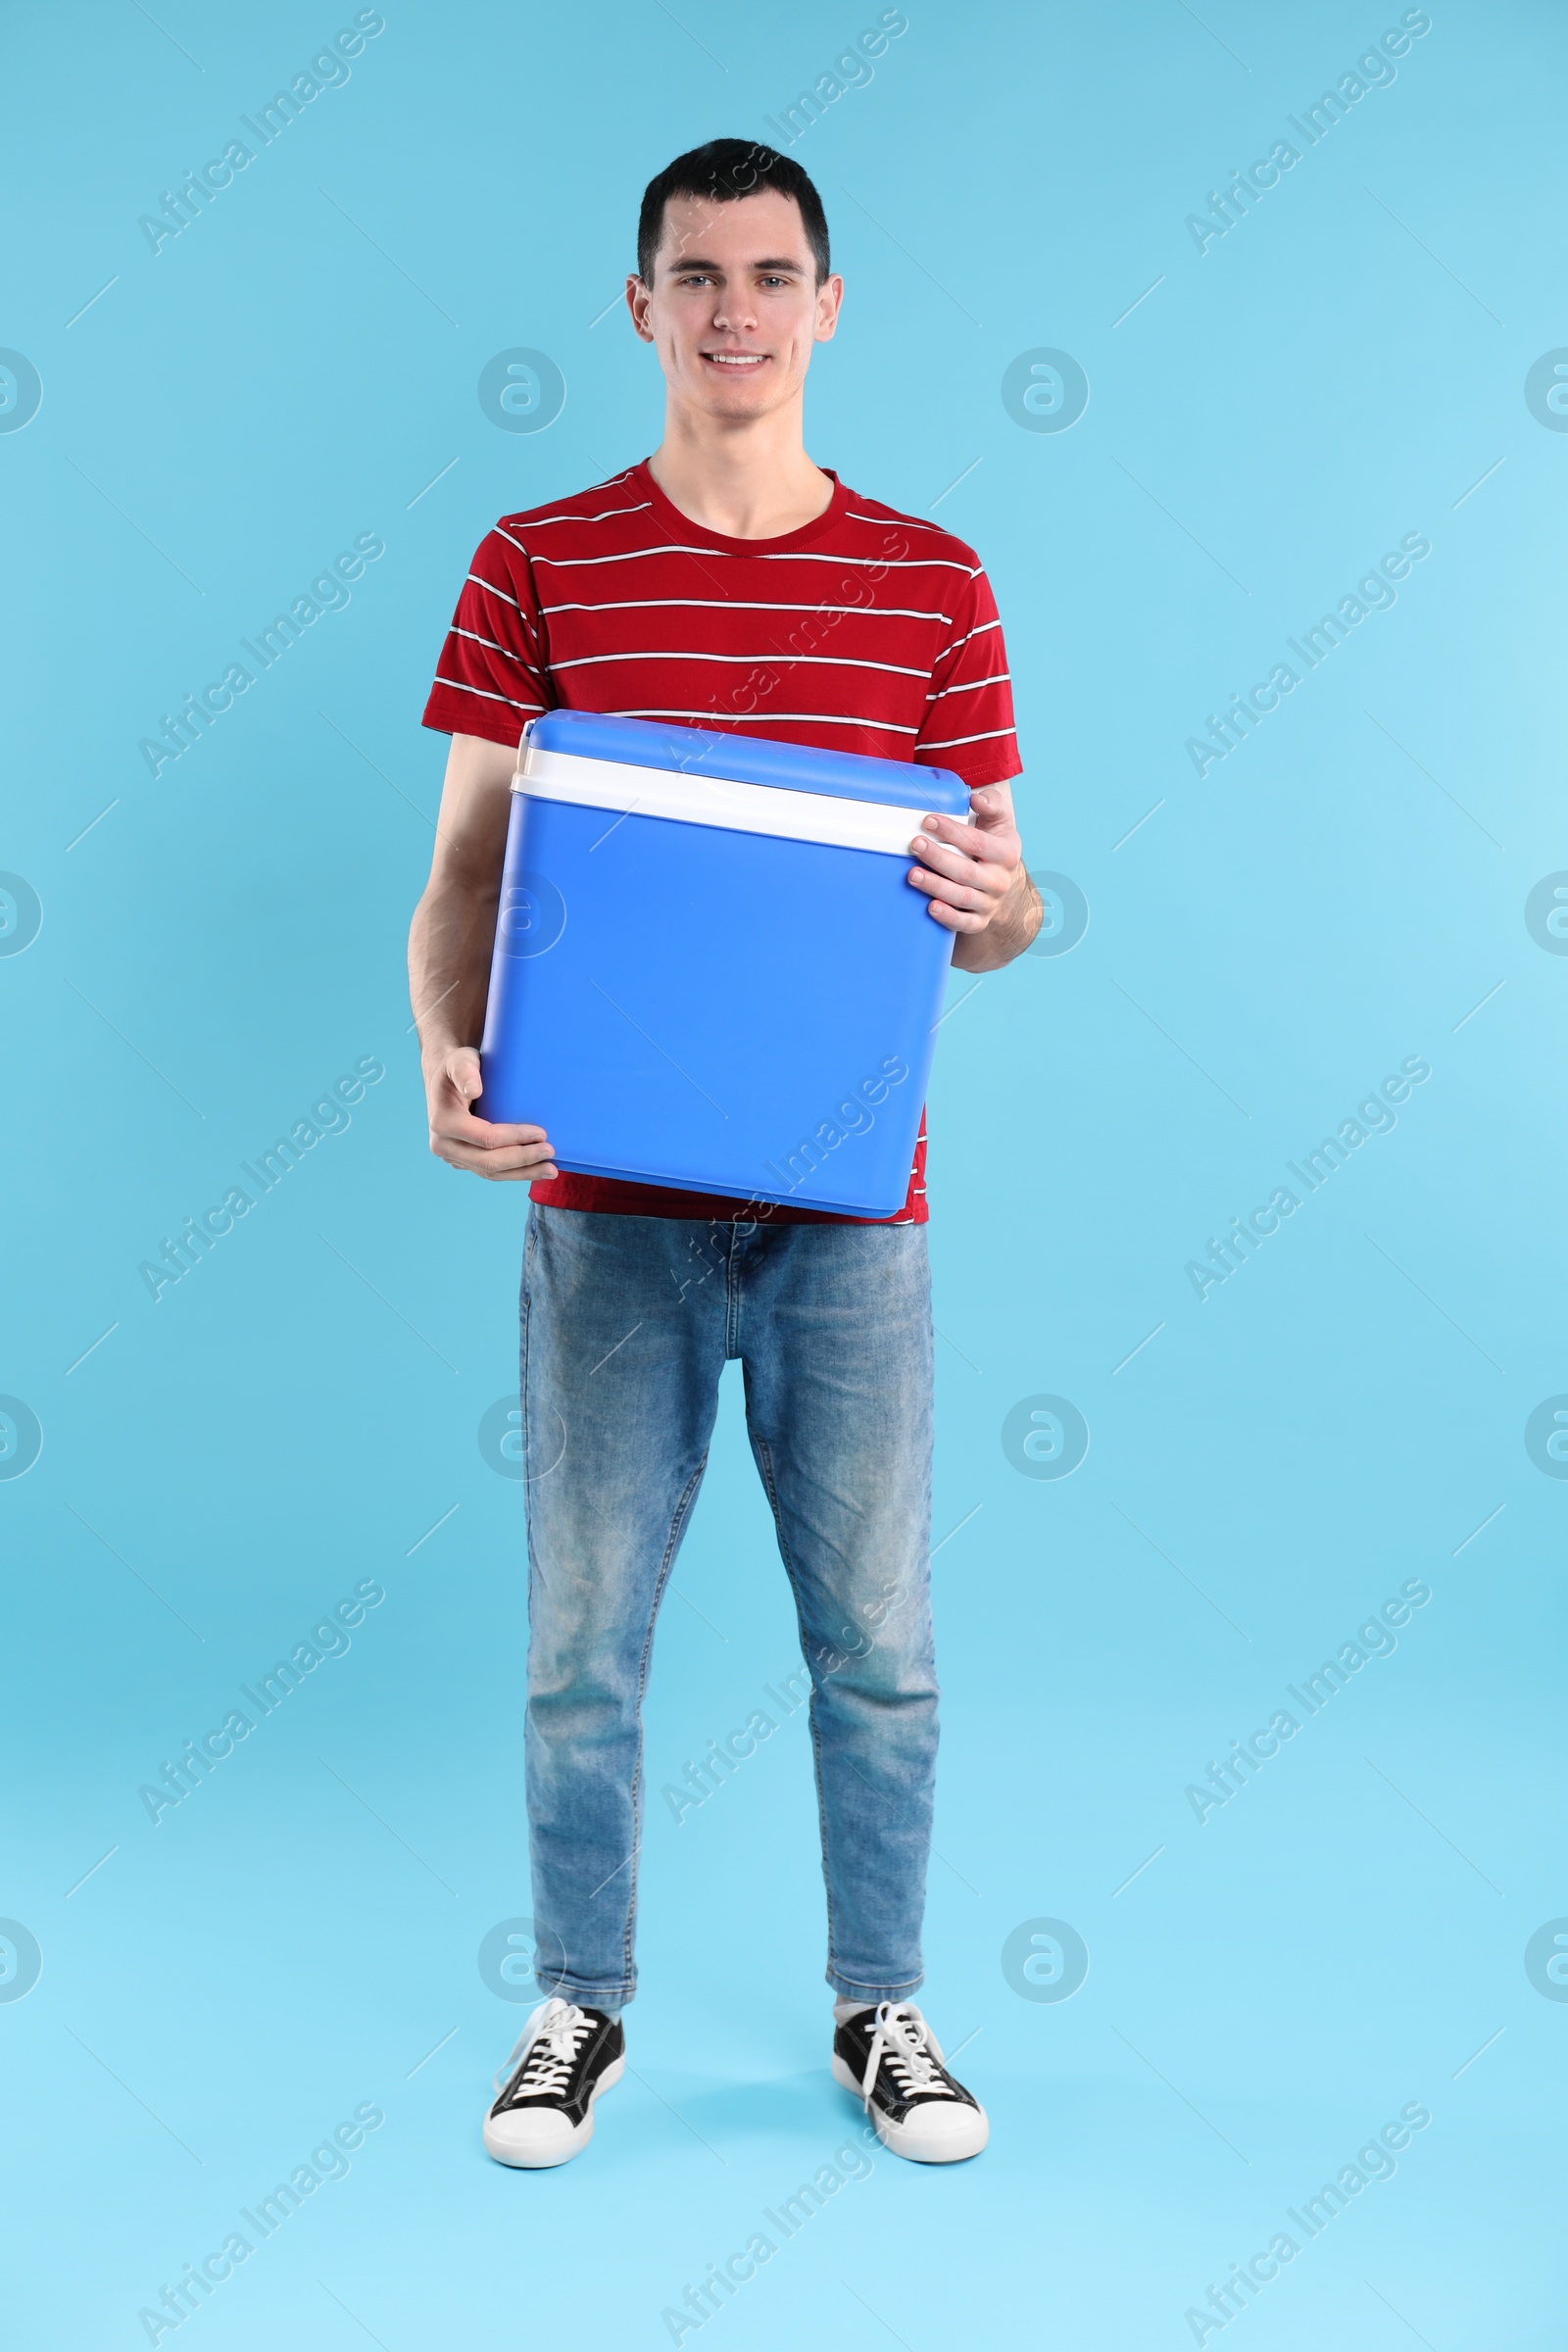 Photo of Man with cool box on light blue background